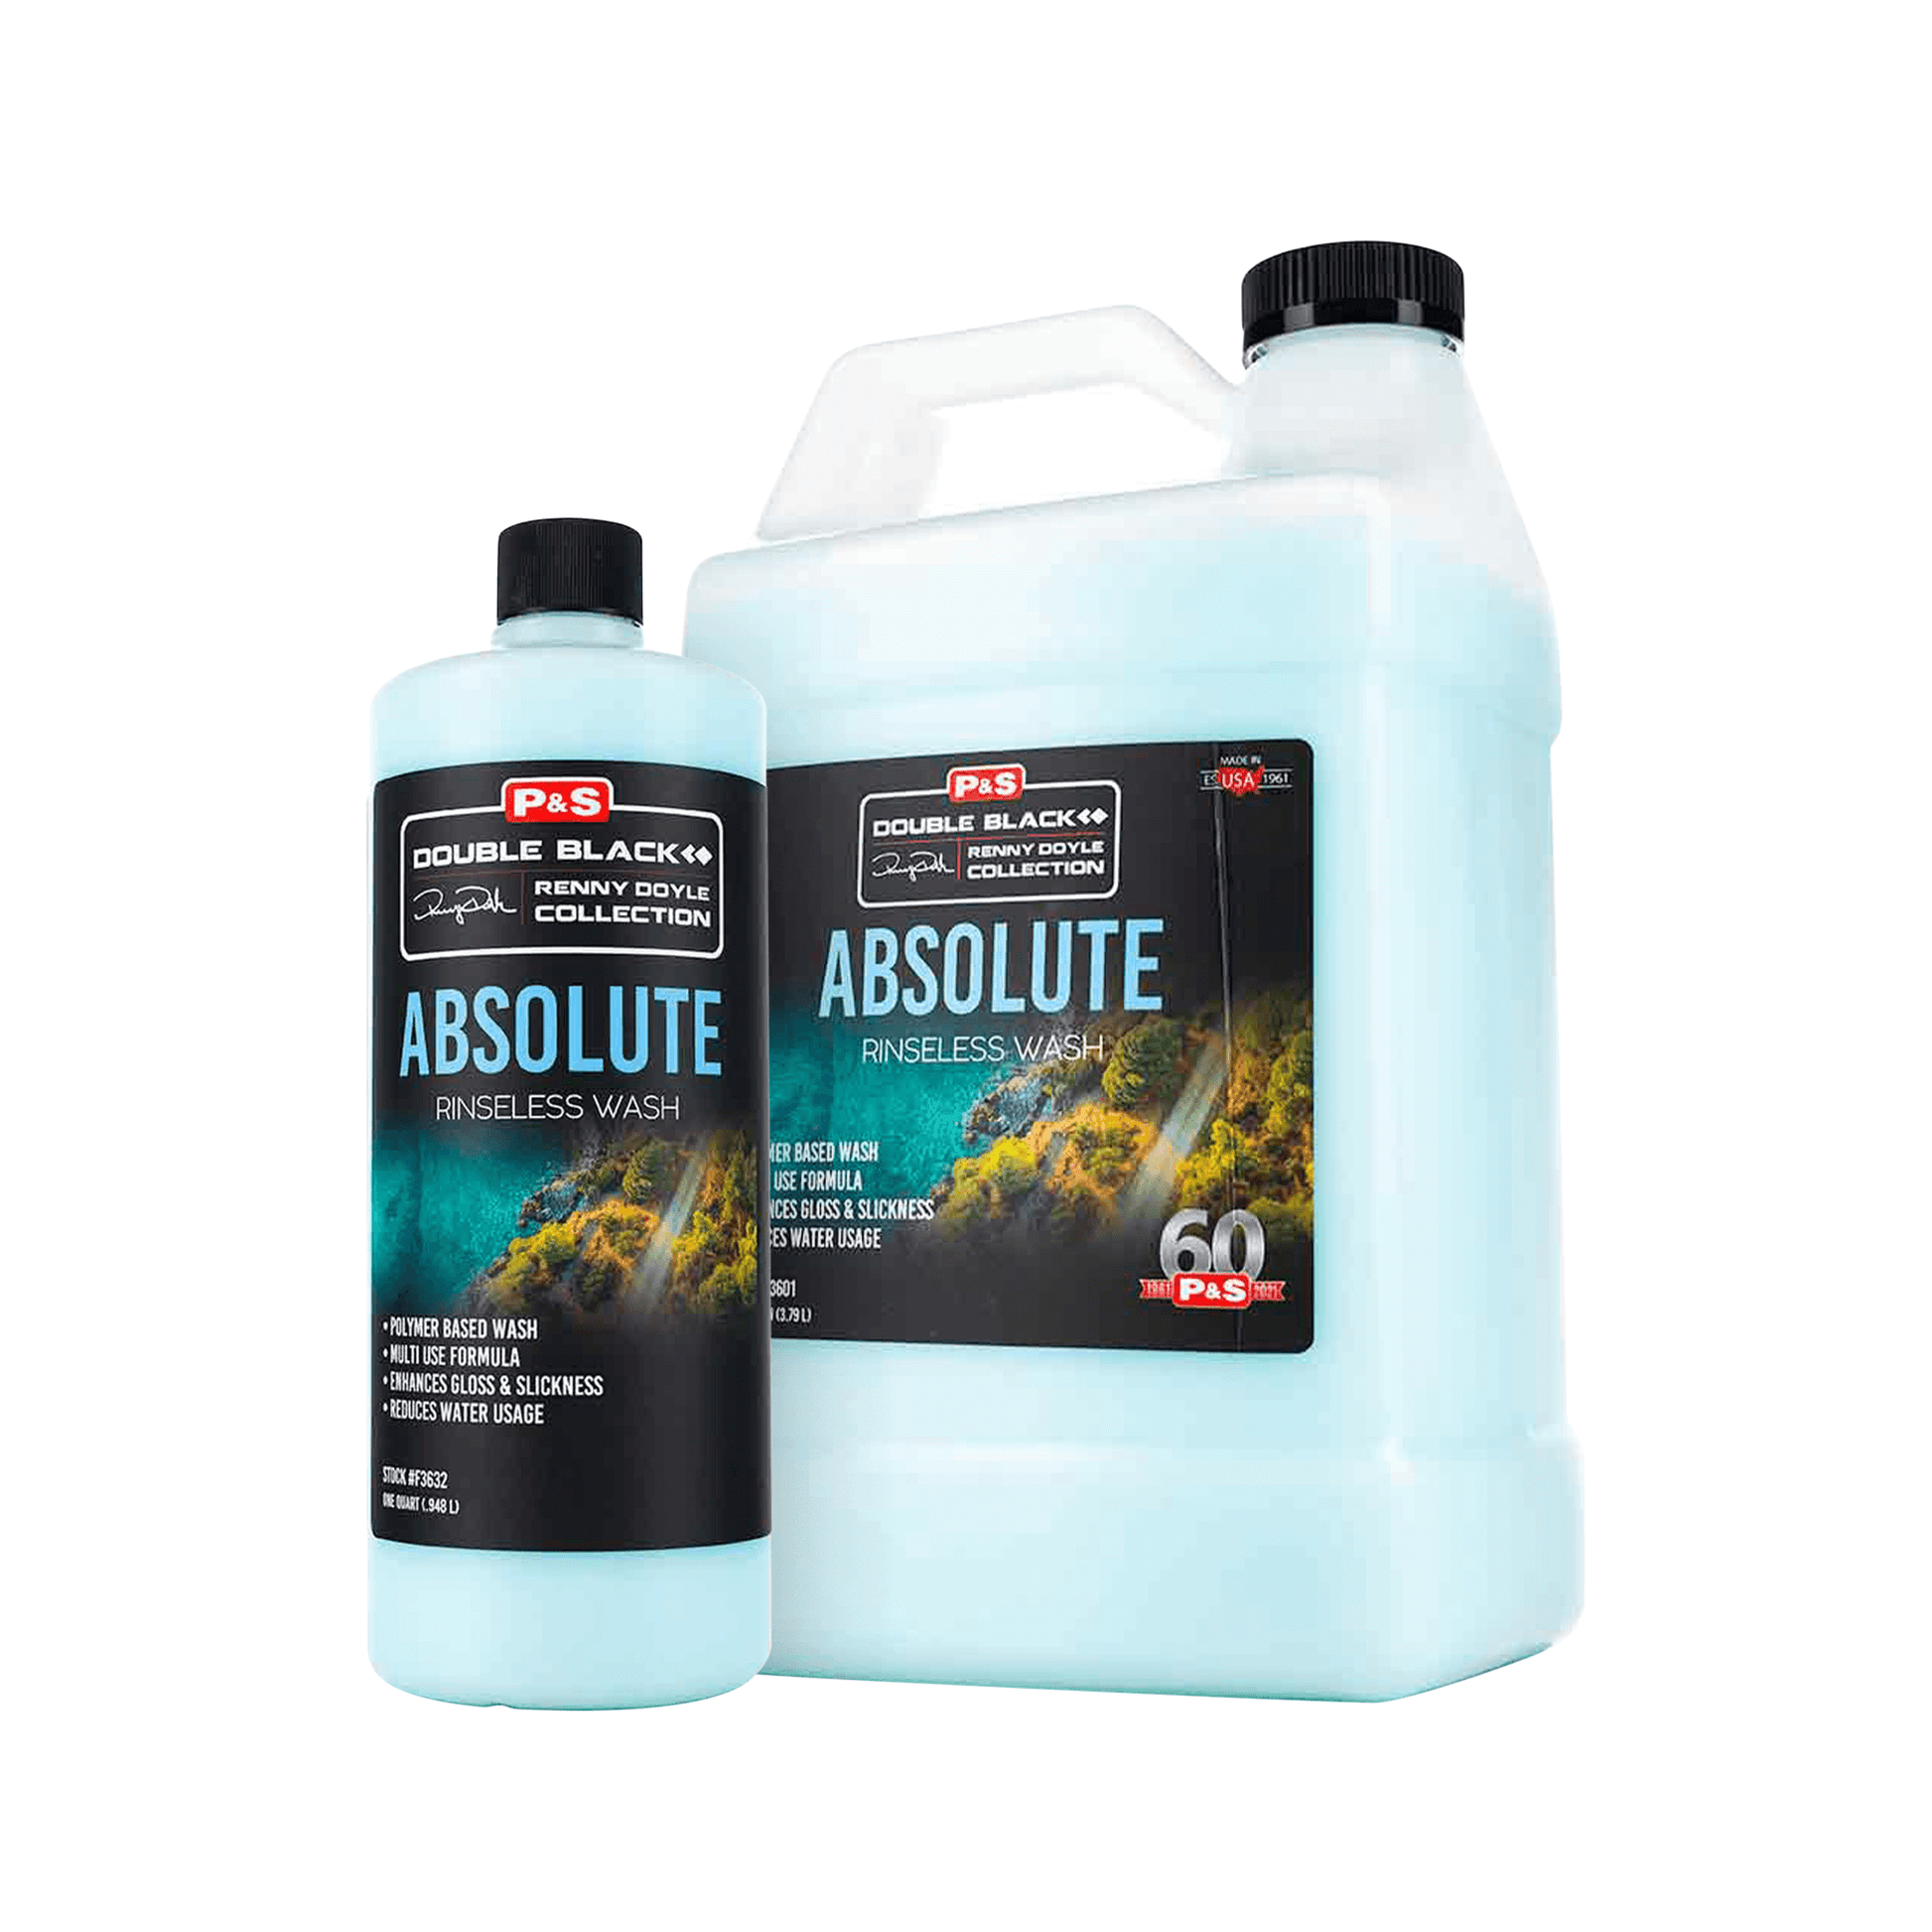  P&S Professional Detail Products - Absolute Rinseless